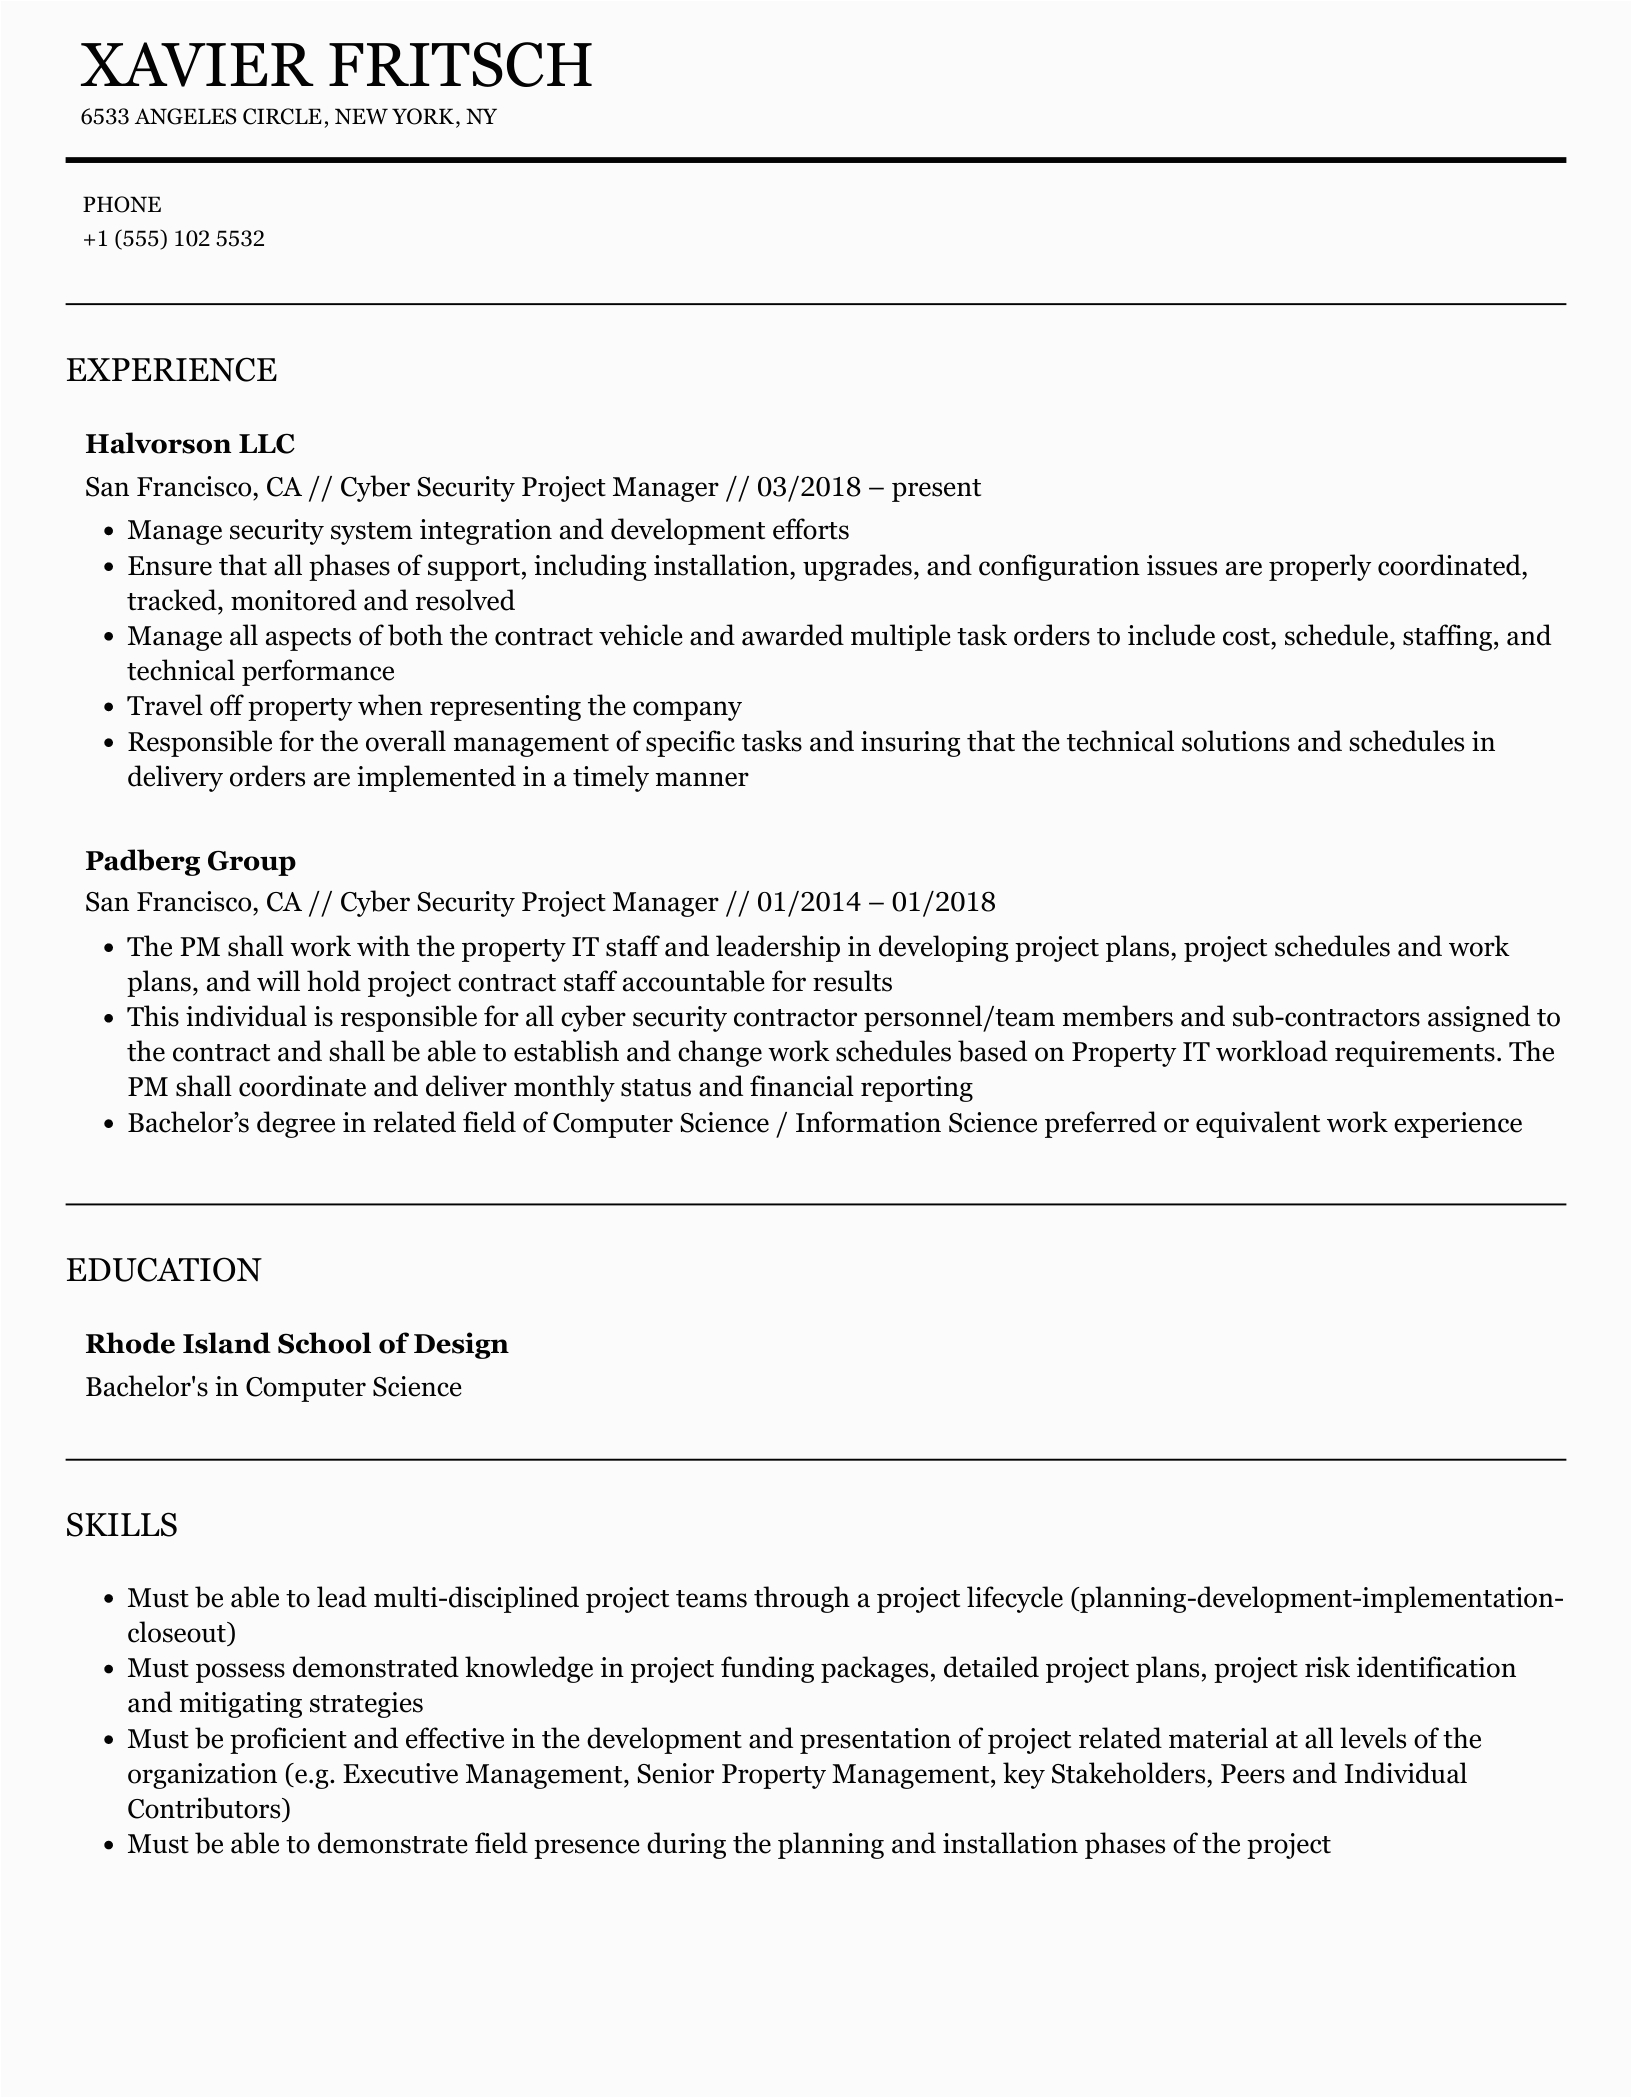 Cyber Security Project Manager Sample Resume Cyber Security Project Manager Resume Samples